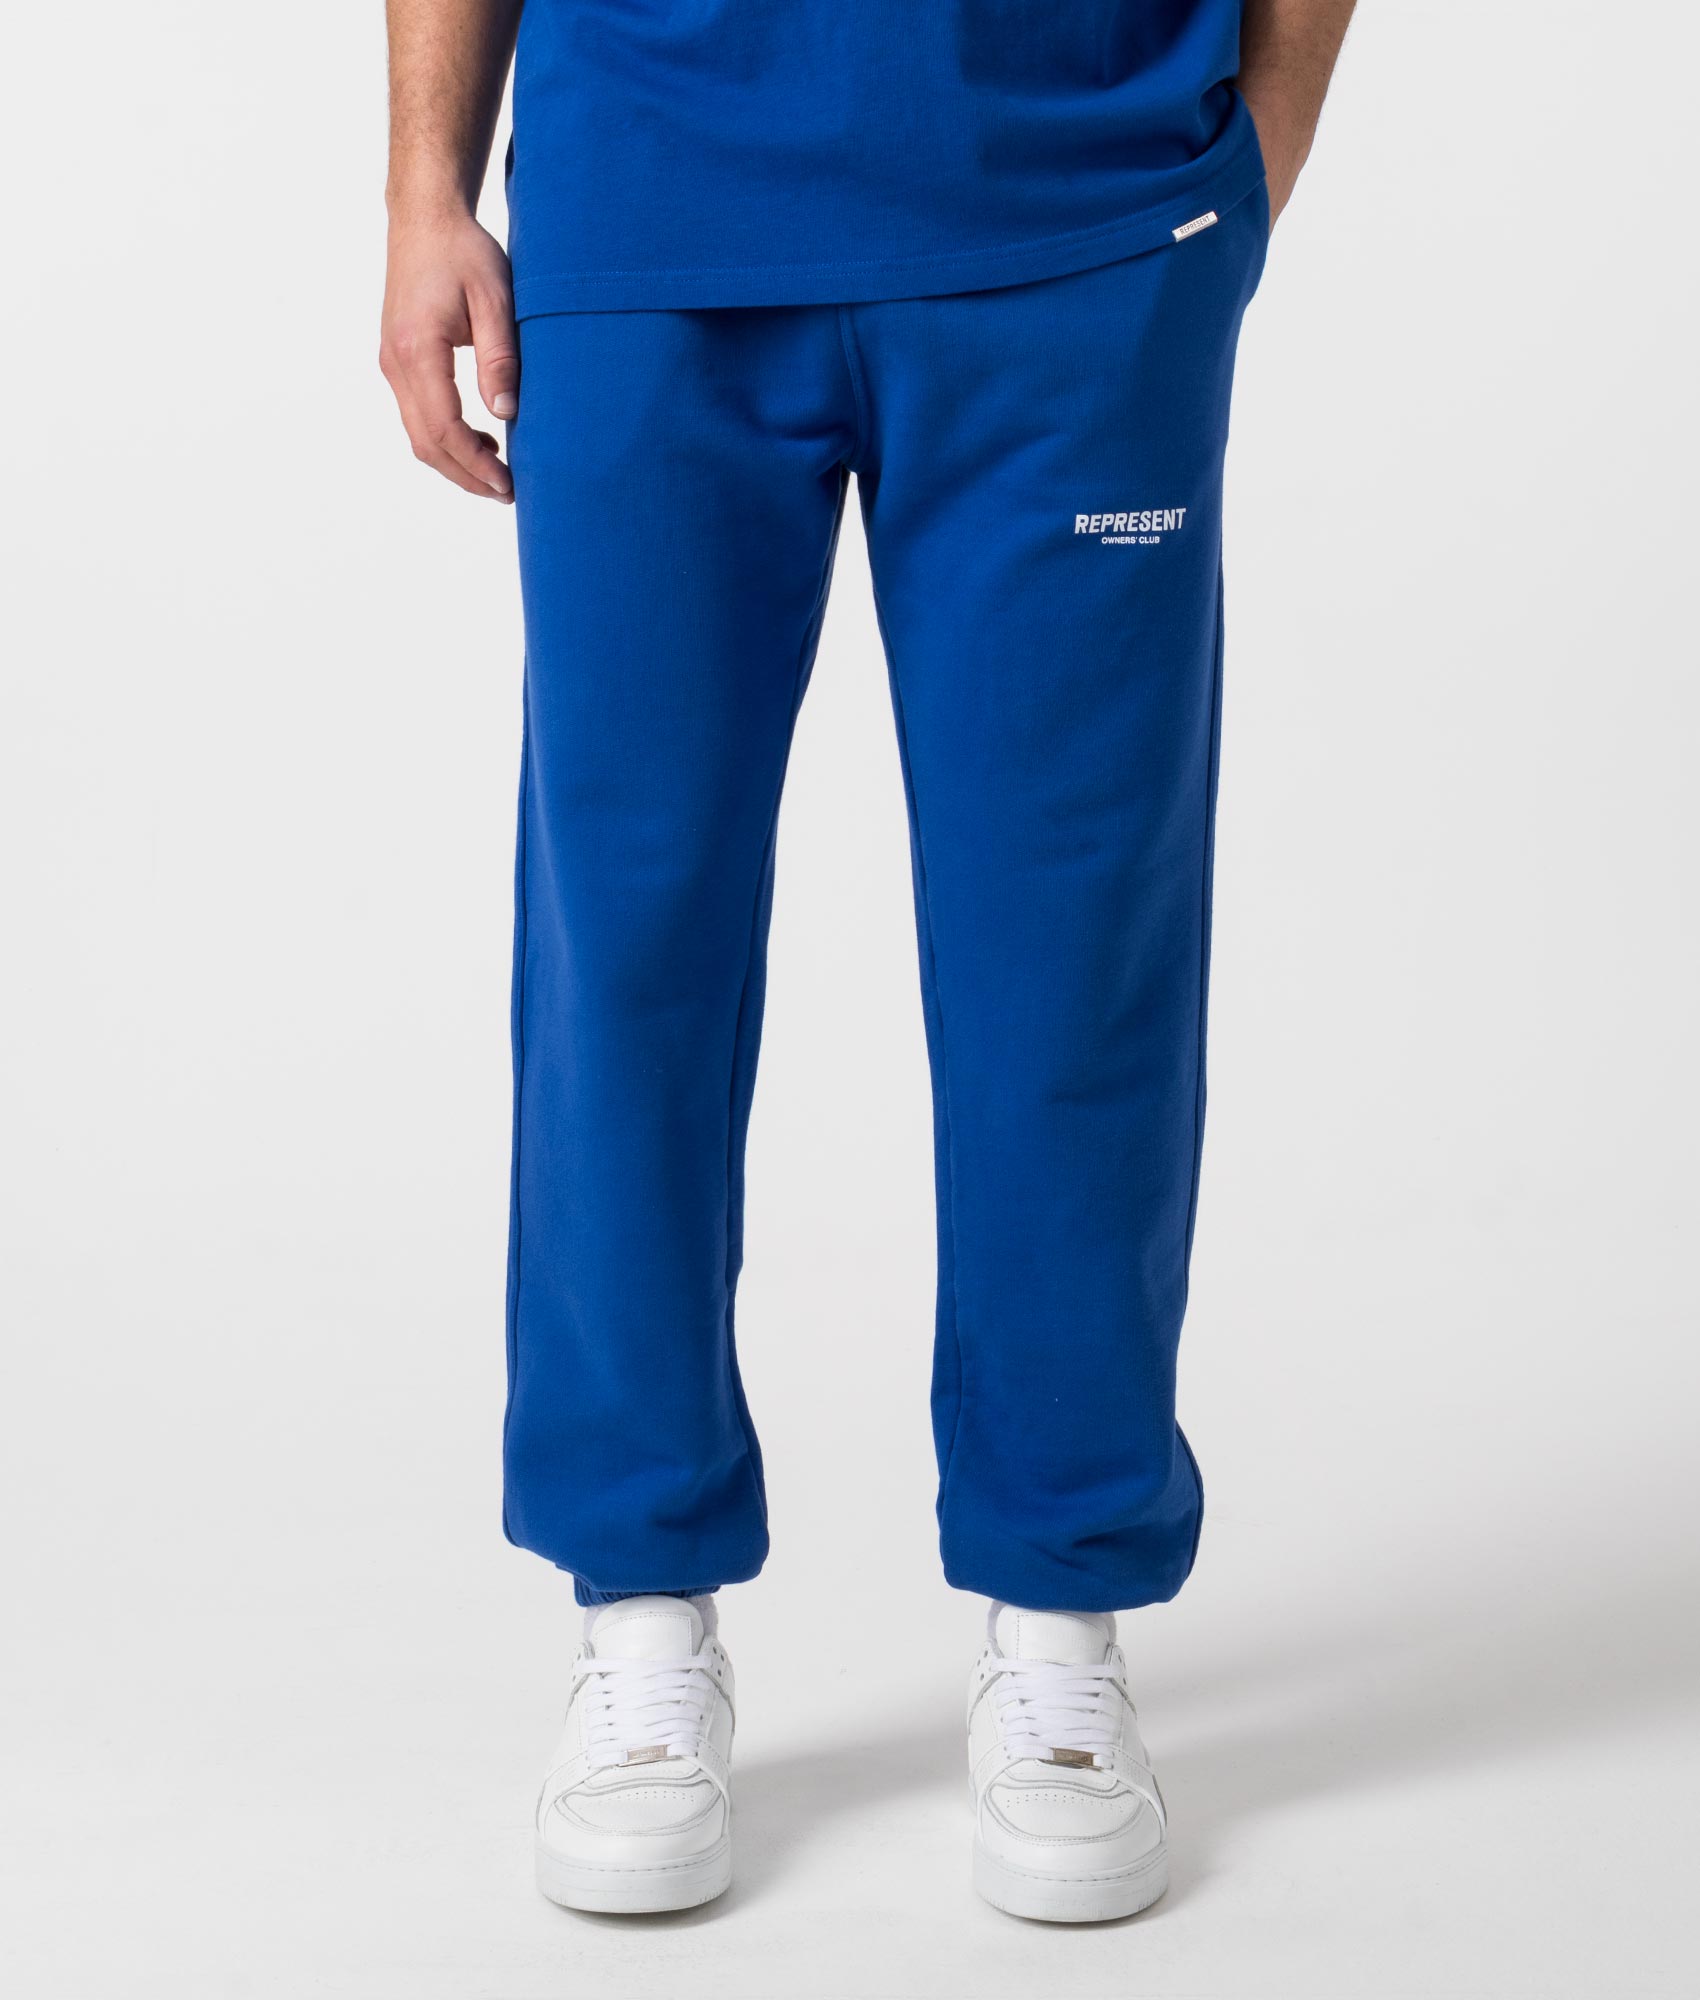 Represent Mens Relaxed Fit Owners' Club Joggers - Colour: 109 Cobalt Blue - Size: Small